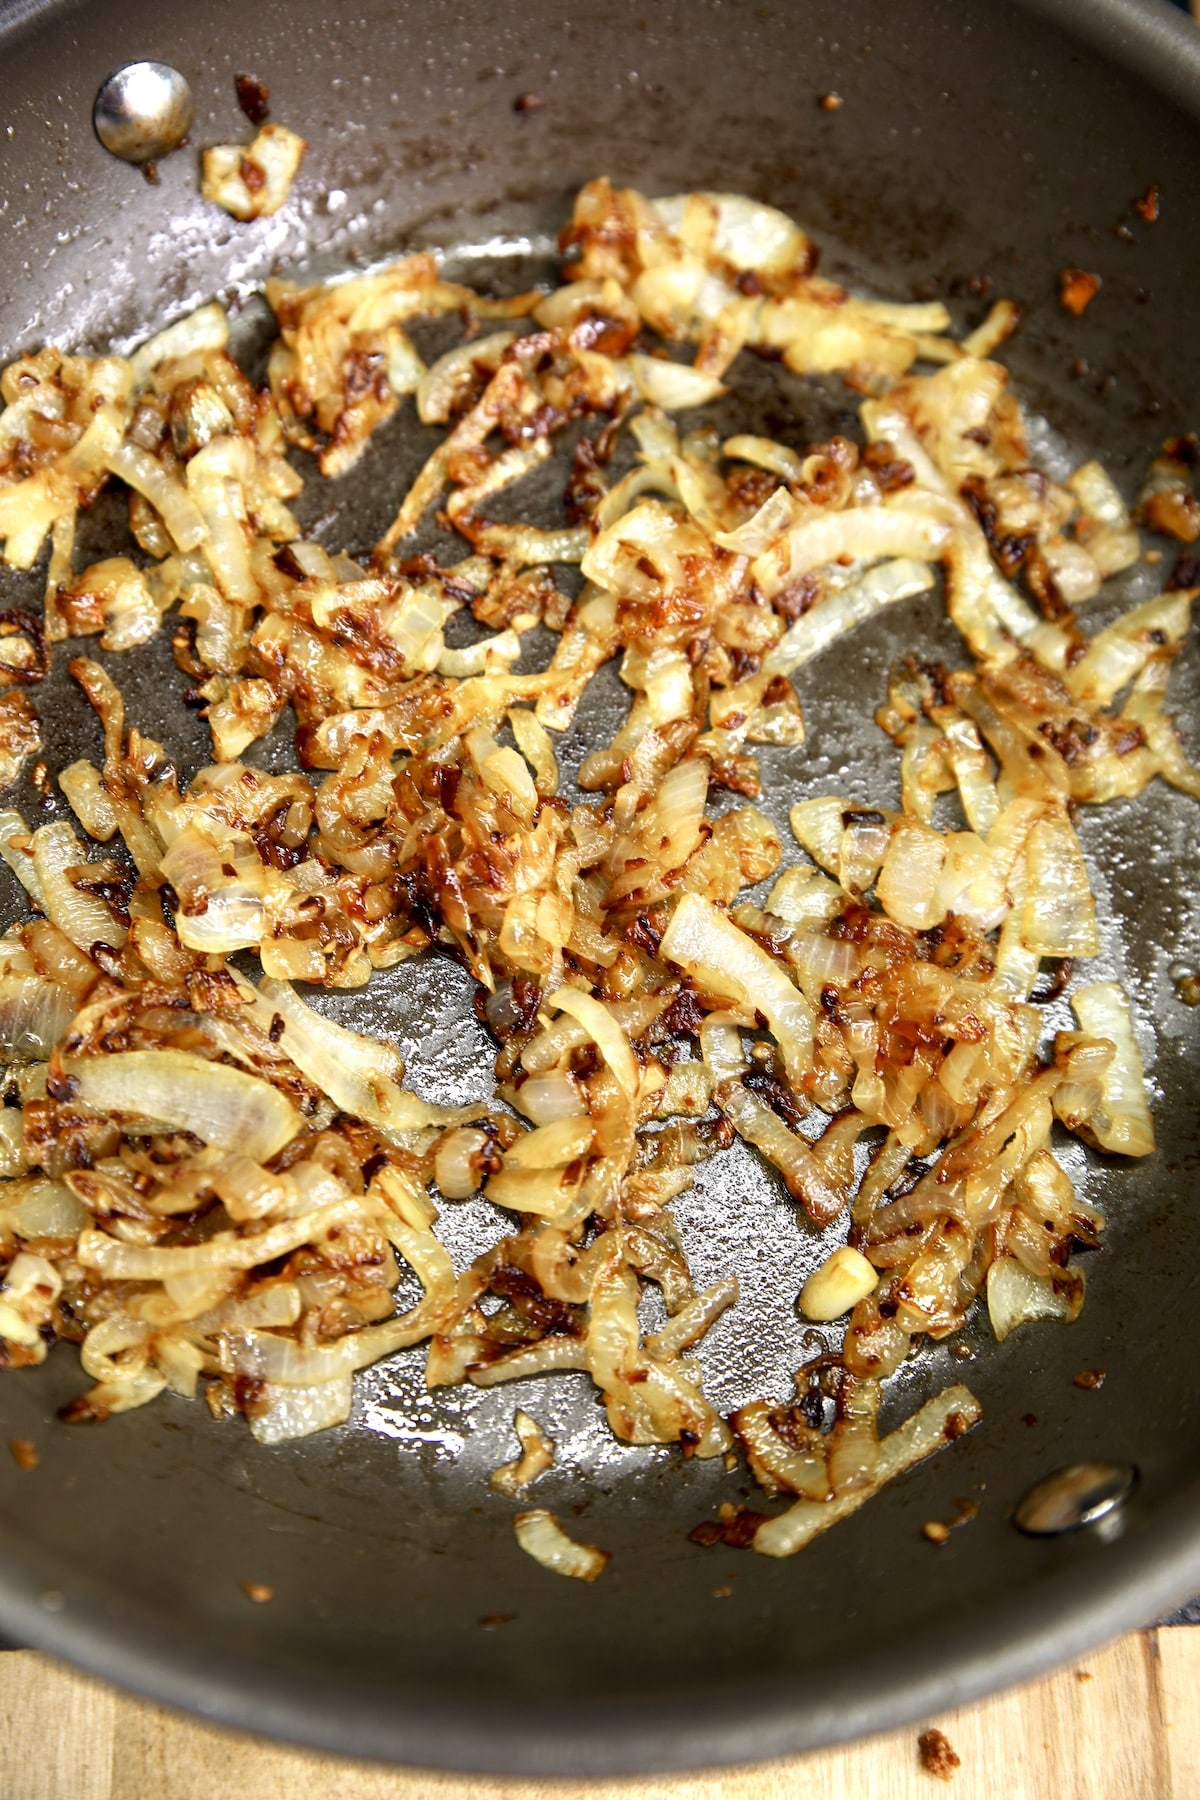 Skillet of caramelized onions.